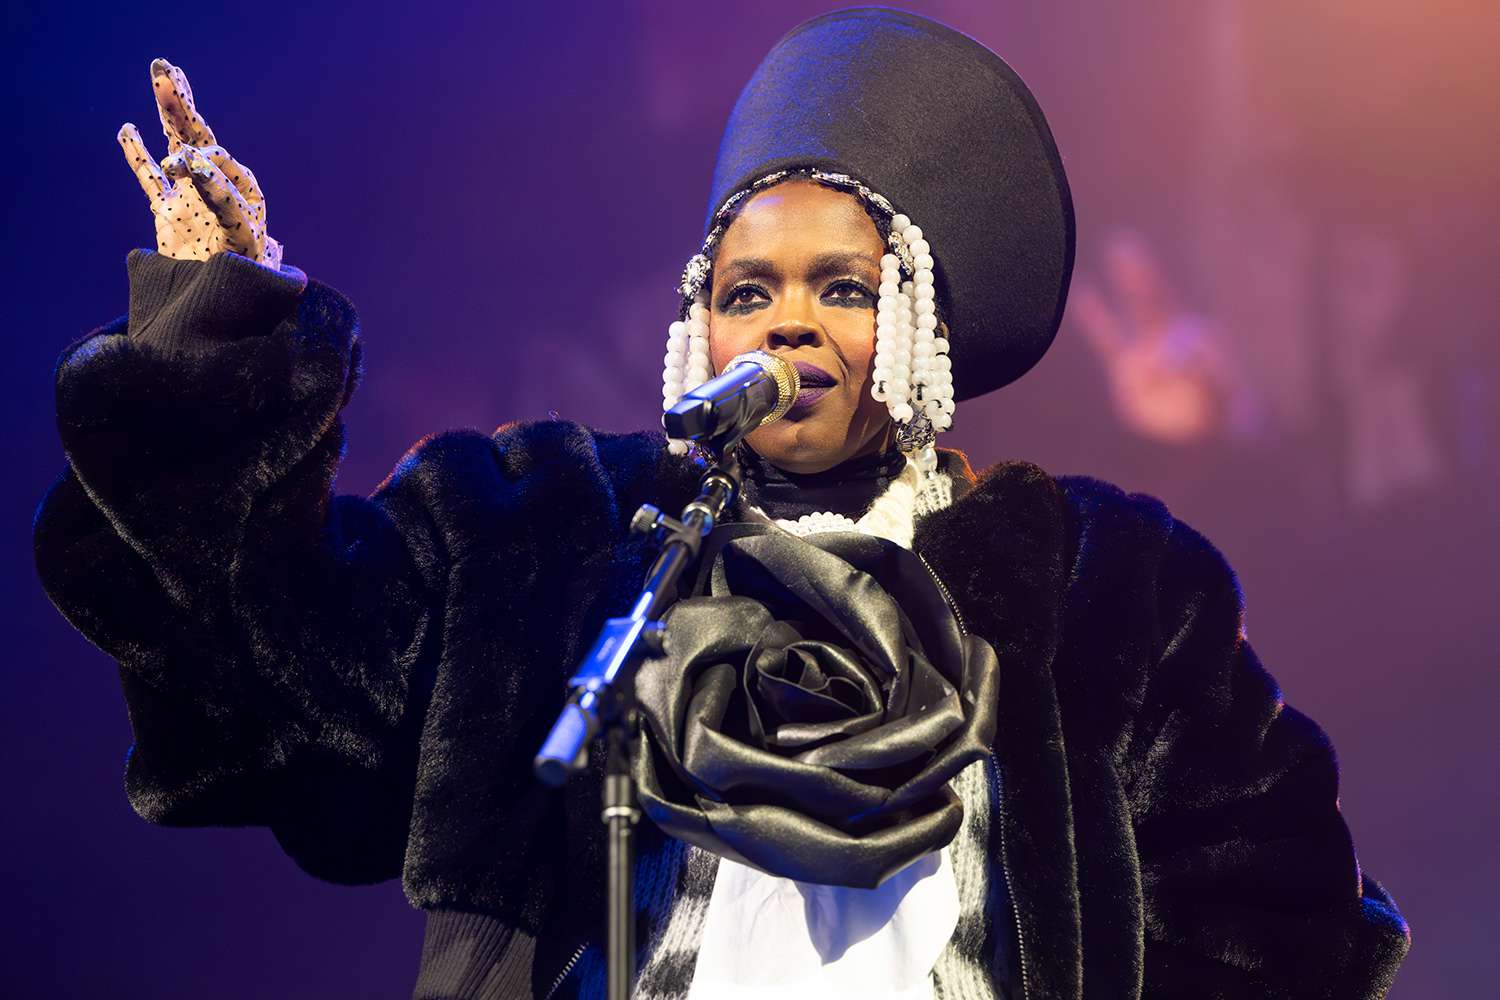 Lauryn Hill's Legendary Debut “The Miseducation” Tops Apple Music's 100 Best Albums of All Time List